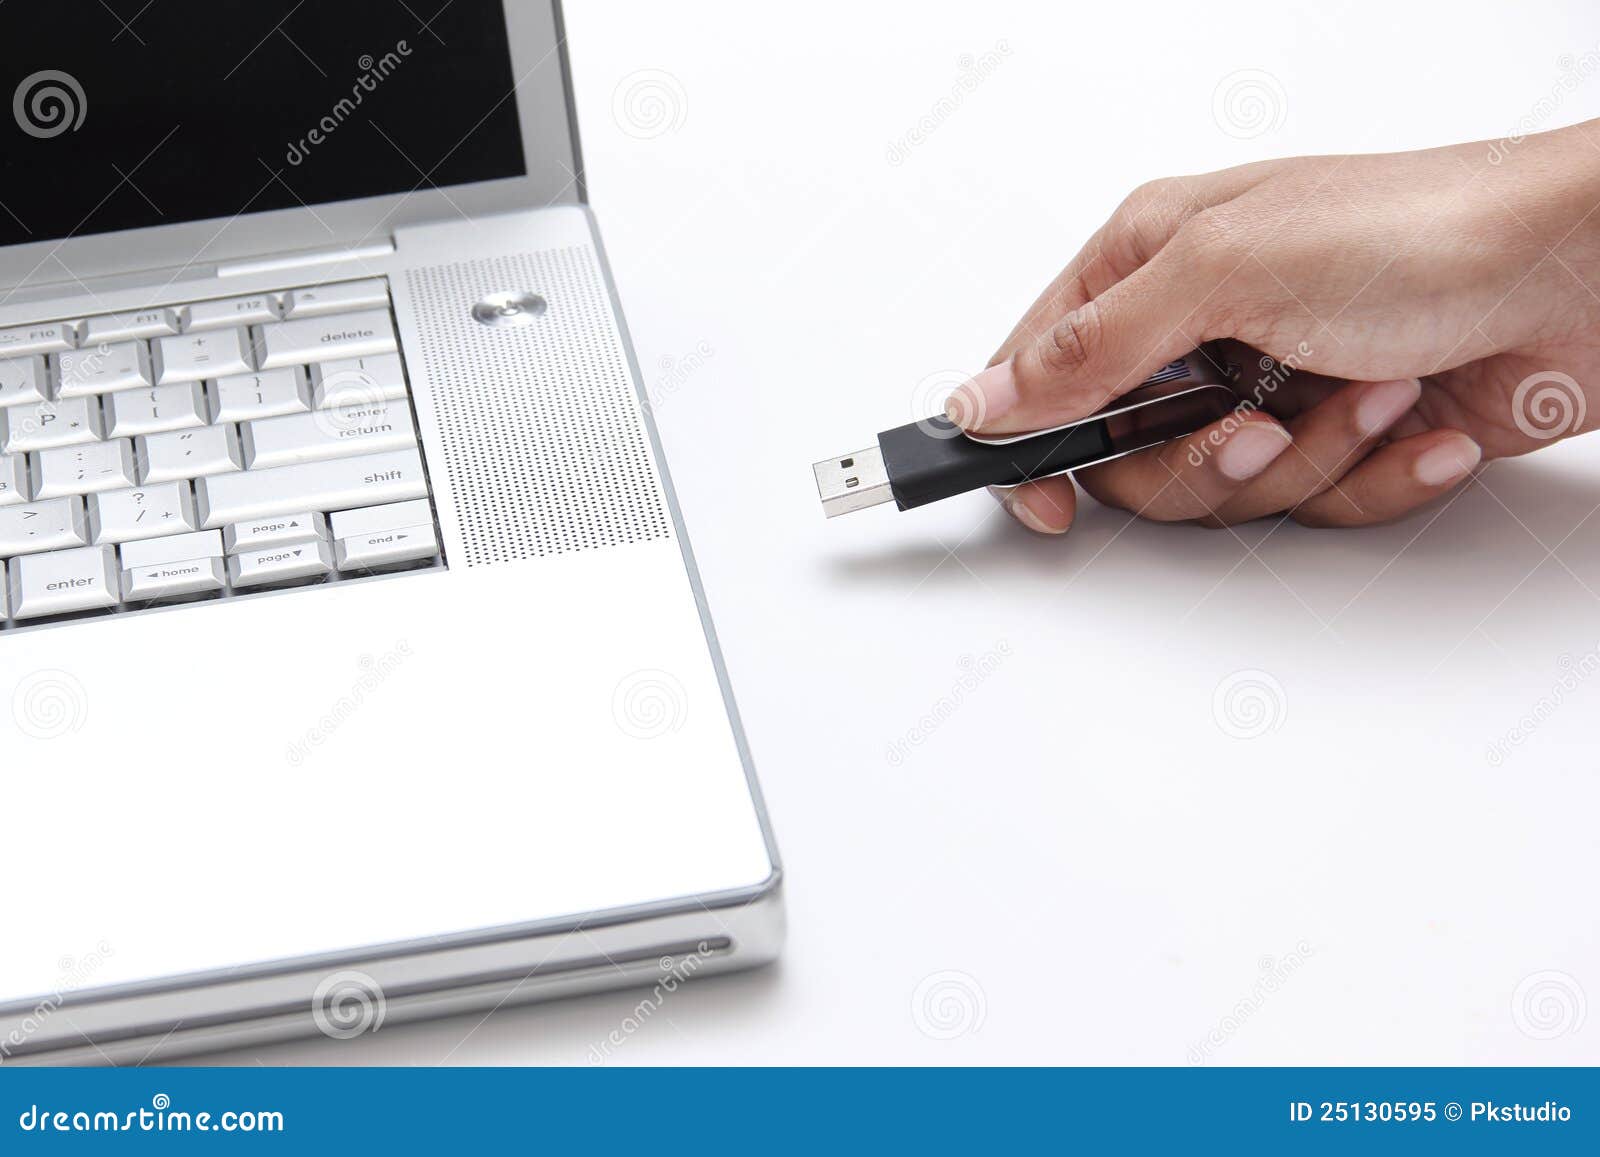 person inserting a usb drive into a laptop